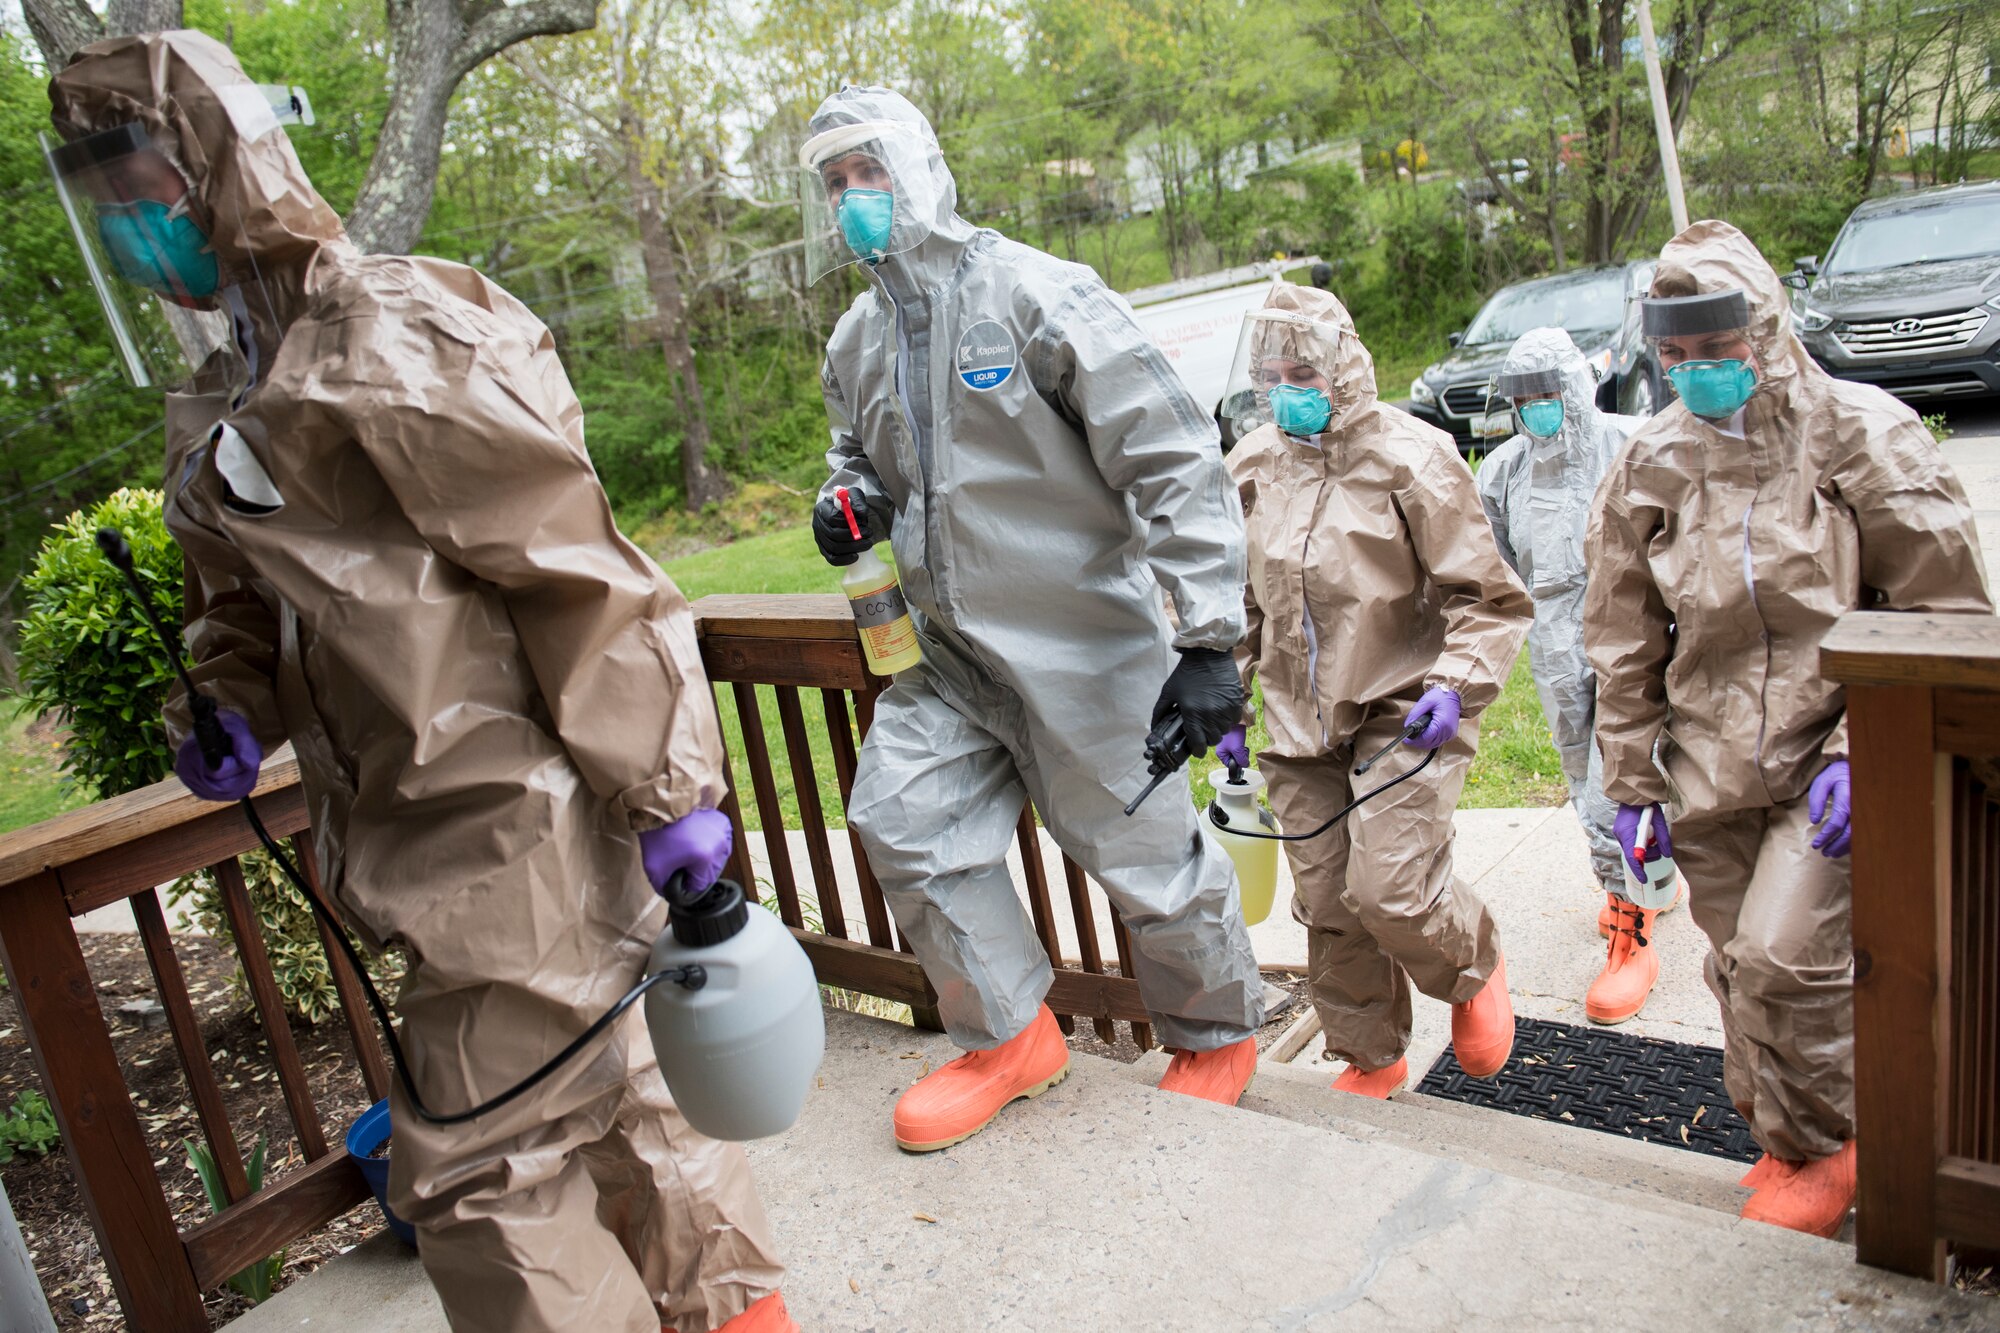 West Virginia National Guard Soldiers and Airmen assigned to Task Force Chemical, Biological, Radiological and Nuclear (CBRN) Response Enterprise (CRE) East, sanitize the Children’s Home Society in Romney, Va., May 1, 2020. Task Force CRE has conducted sanitization and decontamination, COVID-19 swabbing, and personal protective equipment training across the state as part of the COVID-19 response efforts.